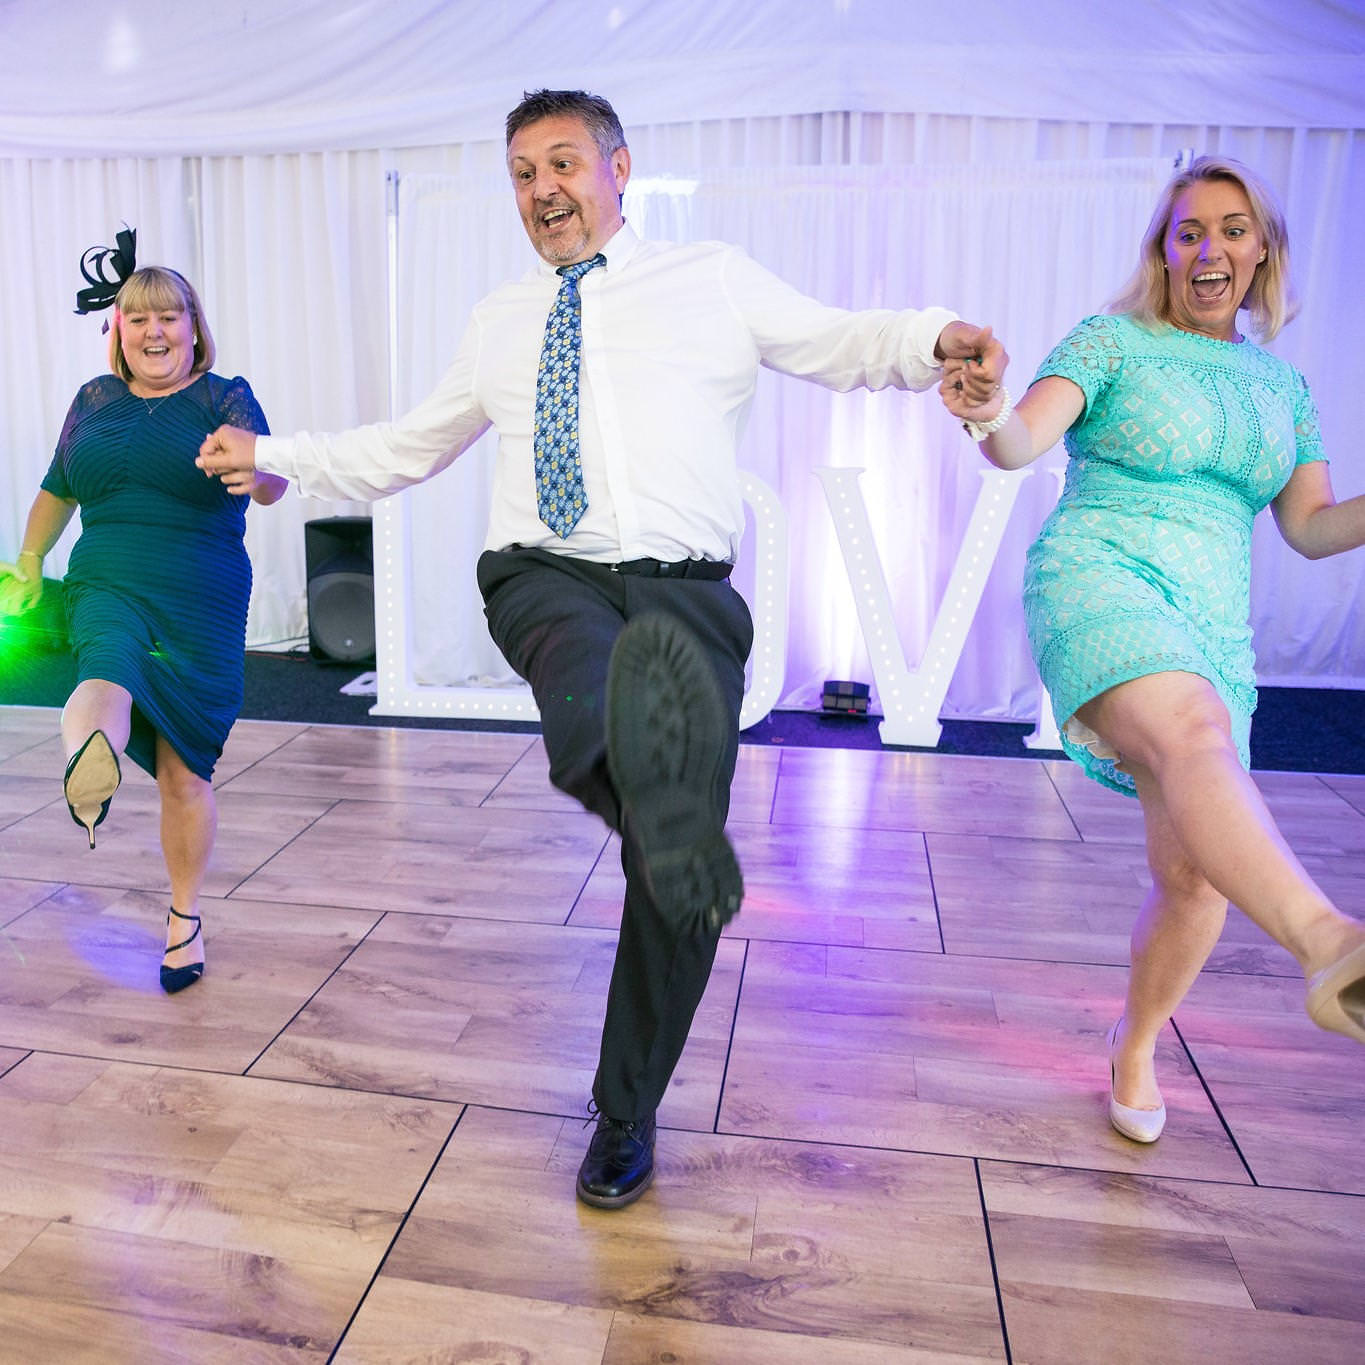 Man holding hands with two women on dance floor as they dance can-can at south wales wedding.